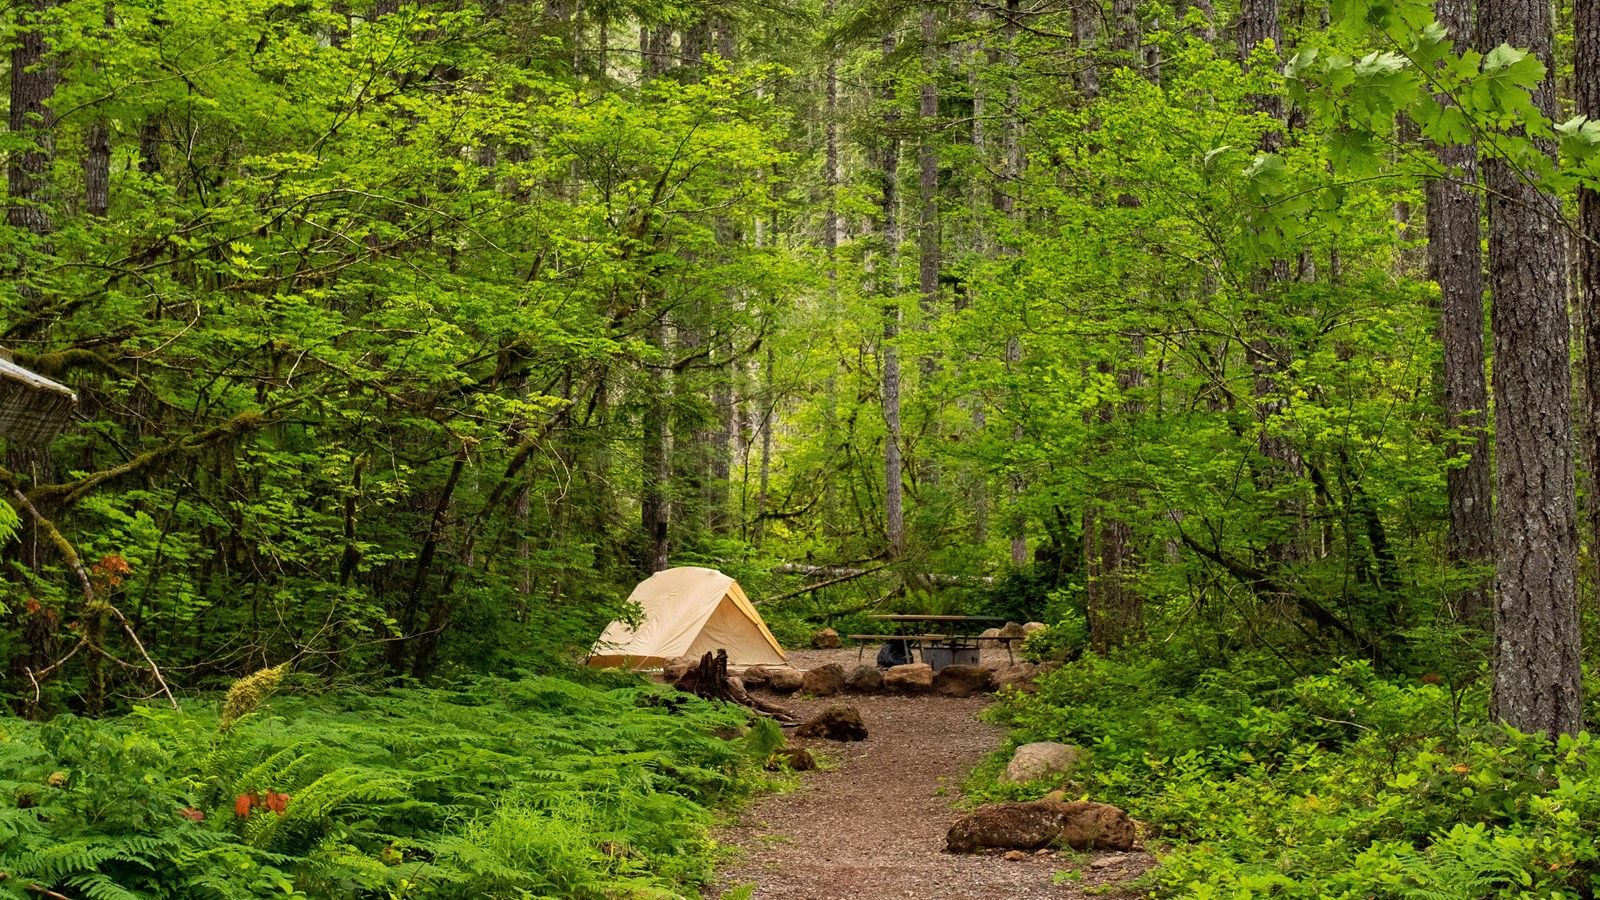 A campsite with a tent in the forest